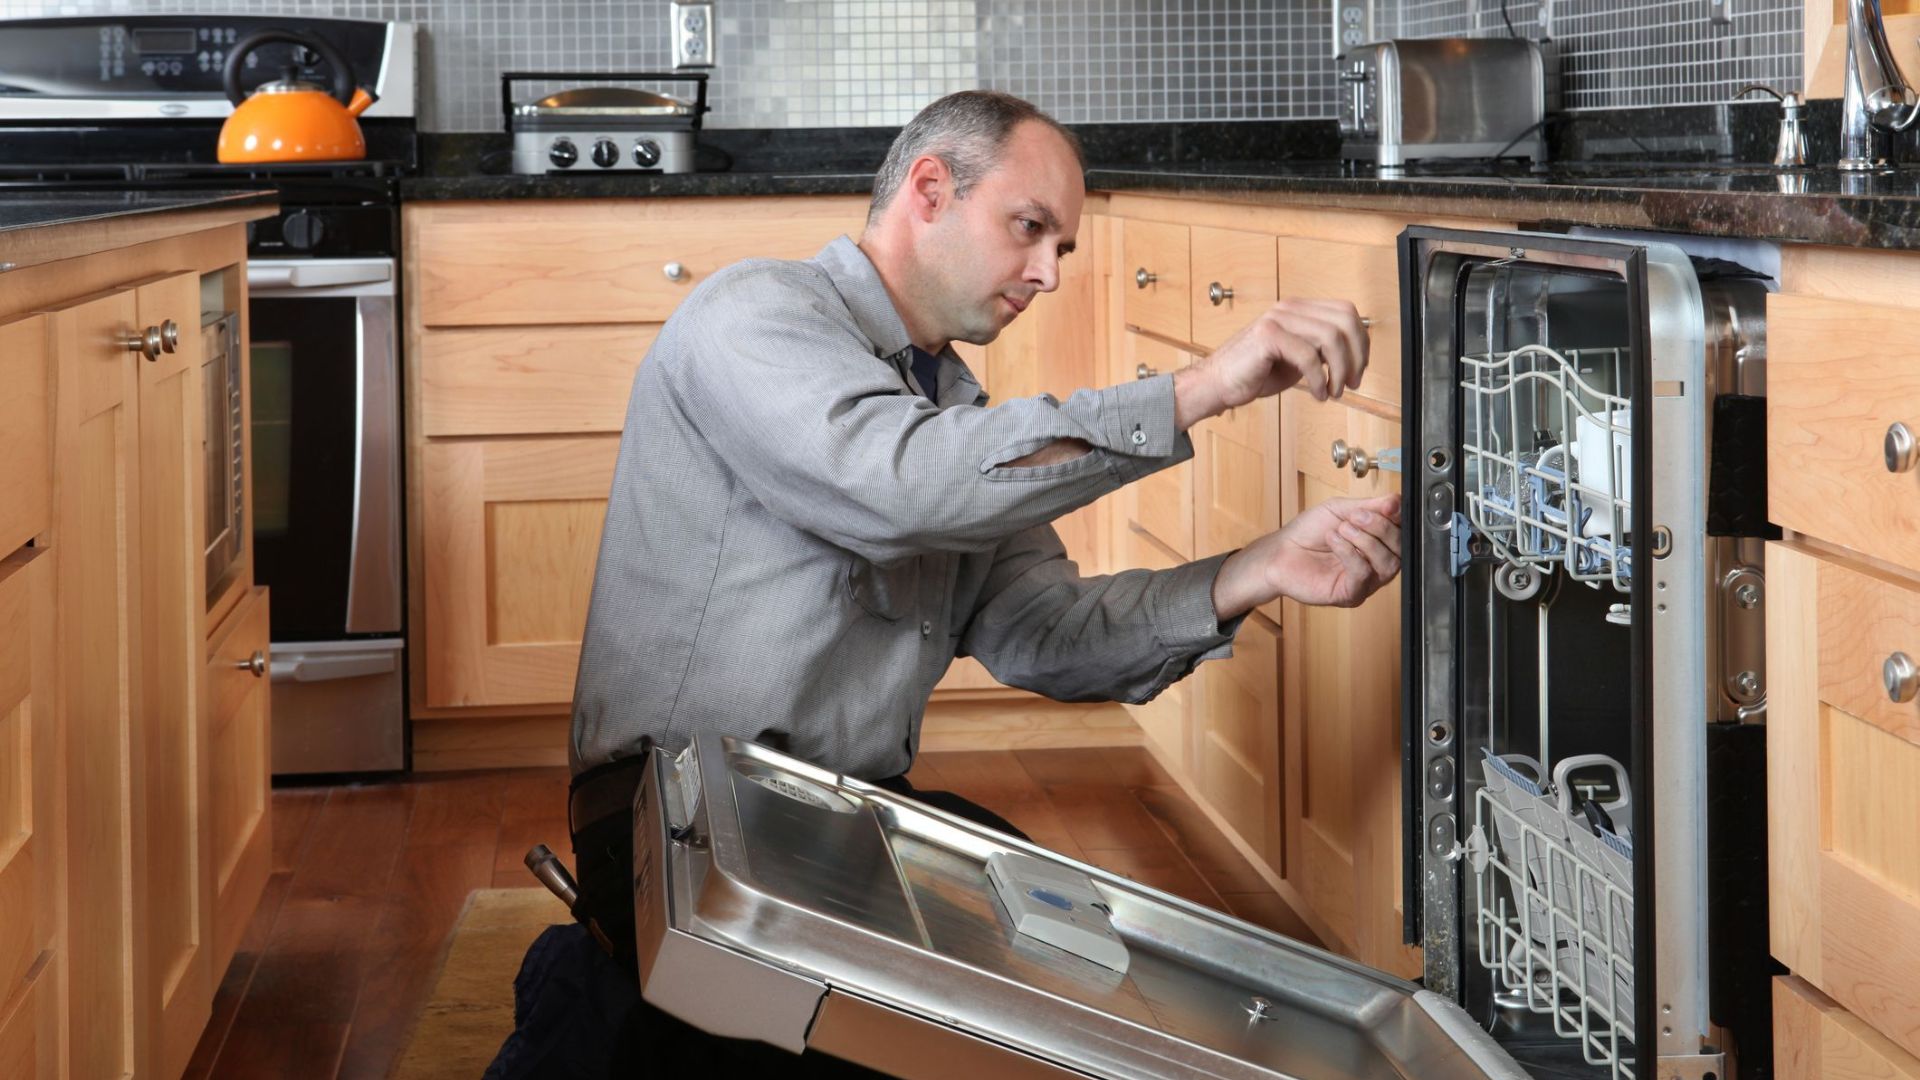 Top 5 Bosch Dishwashеr Problеms and How to Addrеss Thеm Effеctivеly